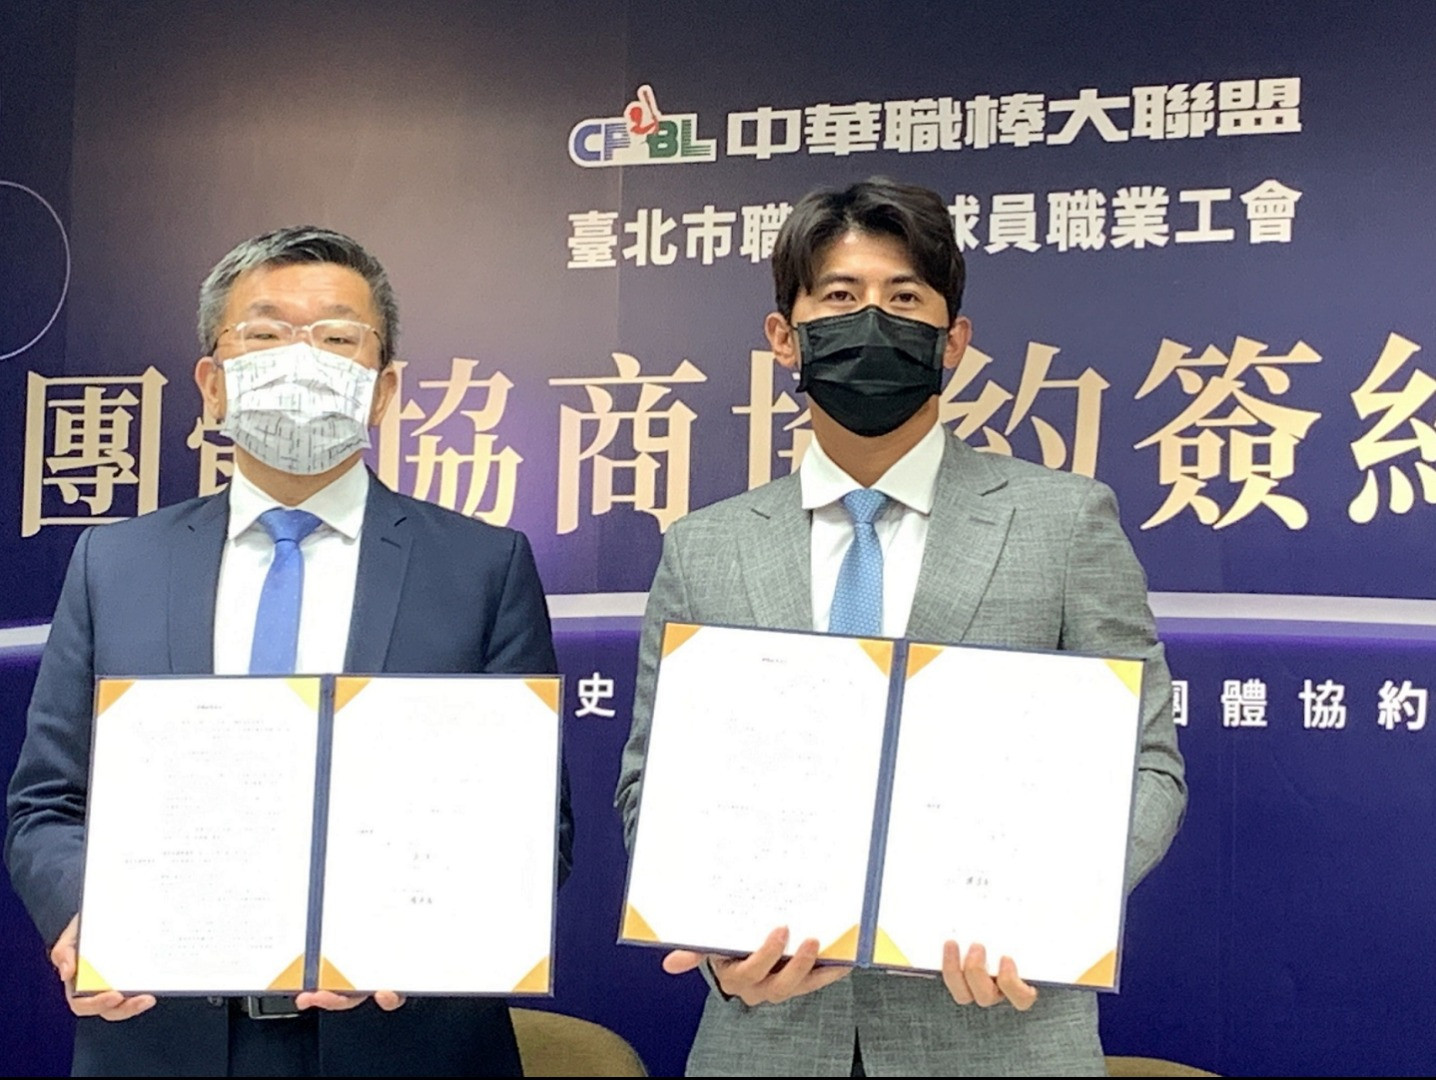 CPBL Commissioner Tsai Chi-Chang, left, and TPBPA Acting President Chen Chieh-Hsien, right, signed the agreement on compensation for players representing Taiwan internationally ©WBSC